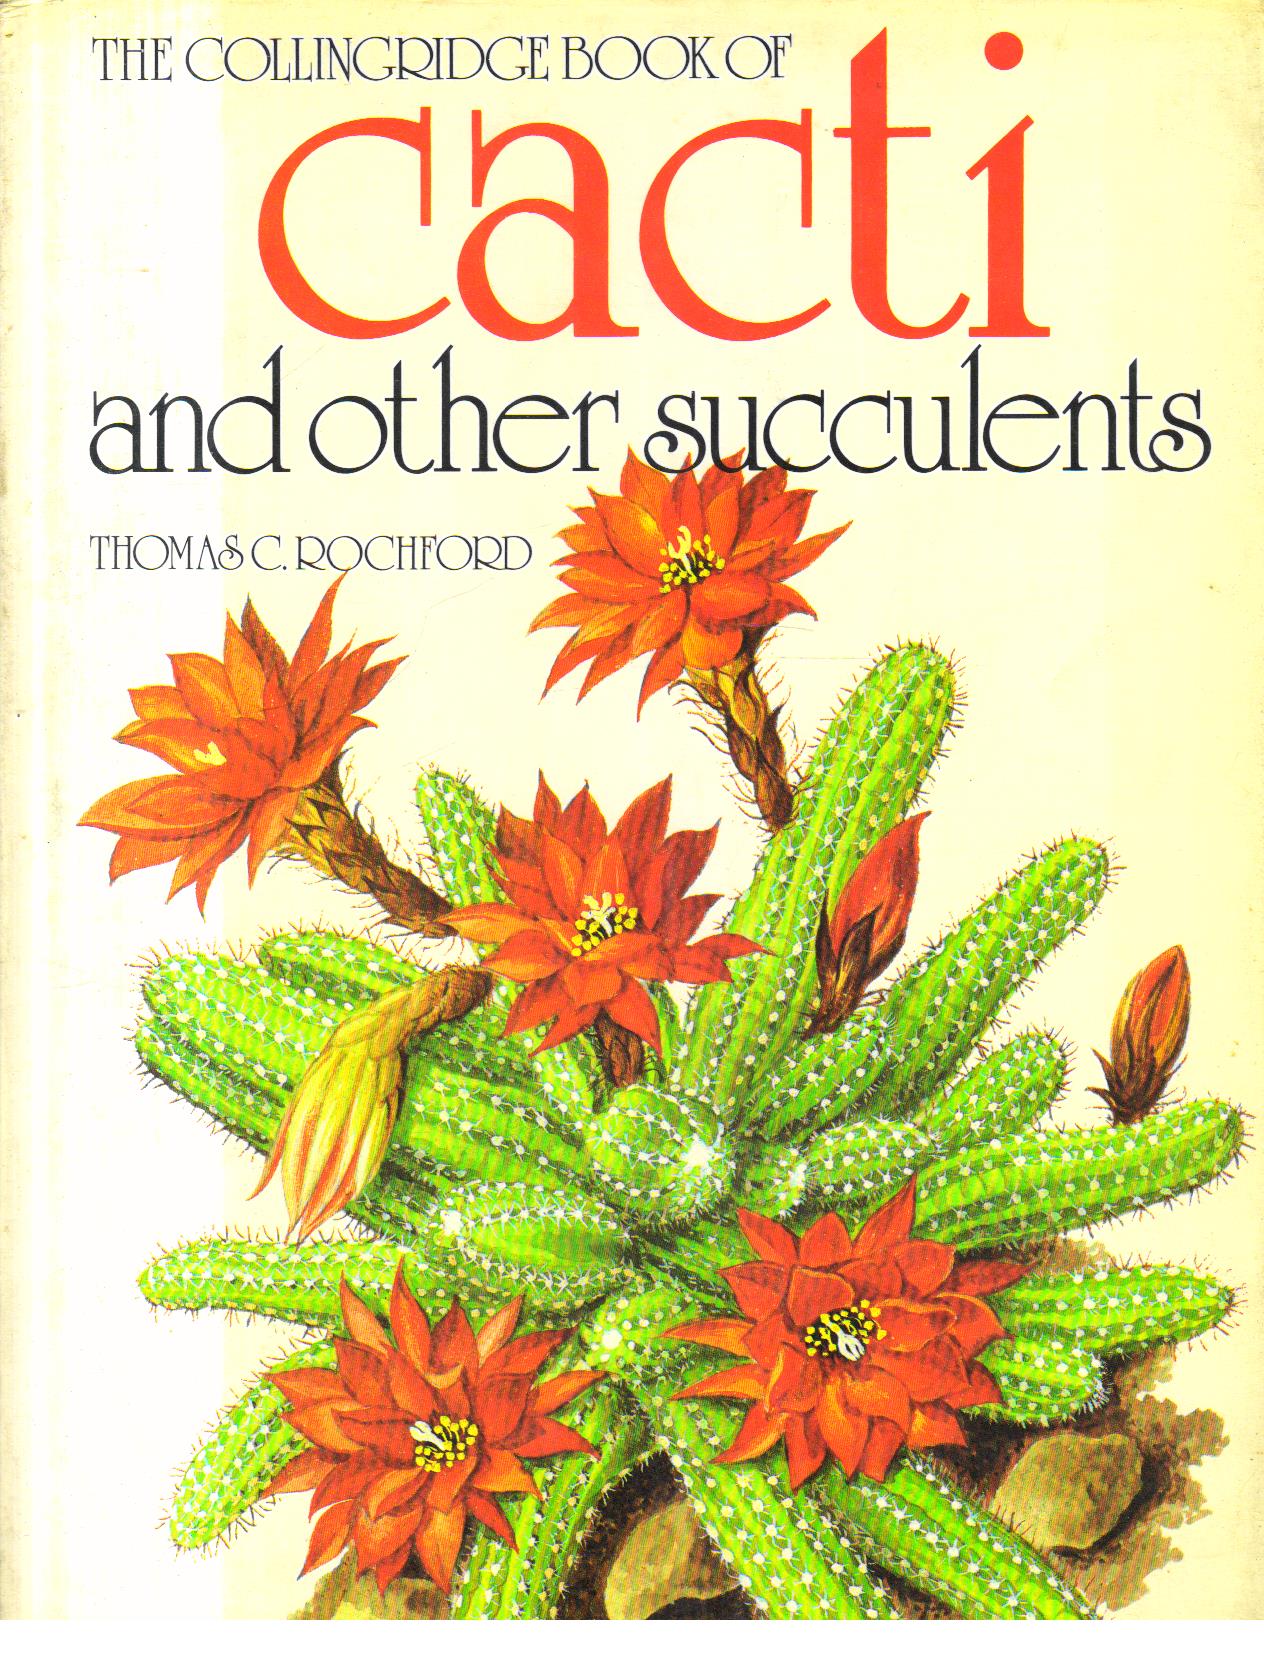 The Colling Ridge Book of Cacti and Other Succulents